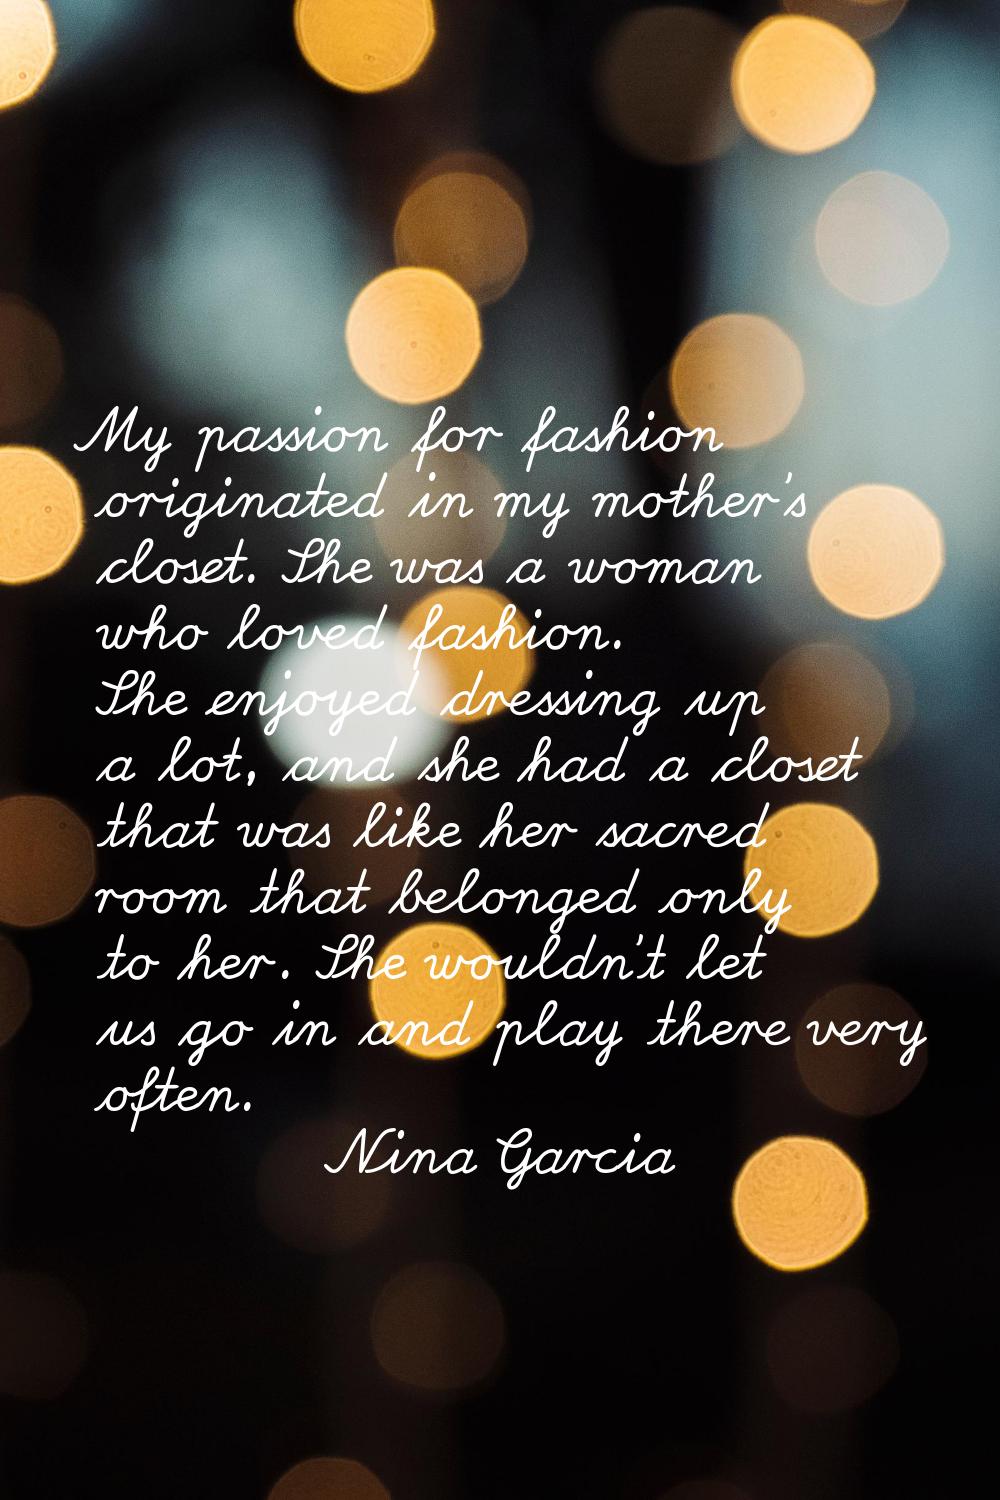 My passion for fashion originated in my mother's closet. She was a woman who loved fashion. She enj